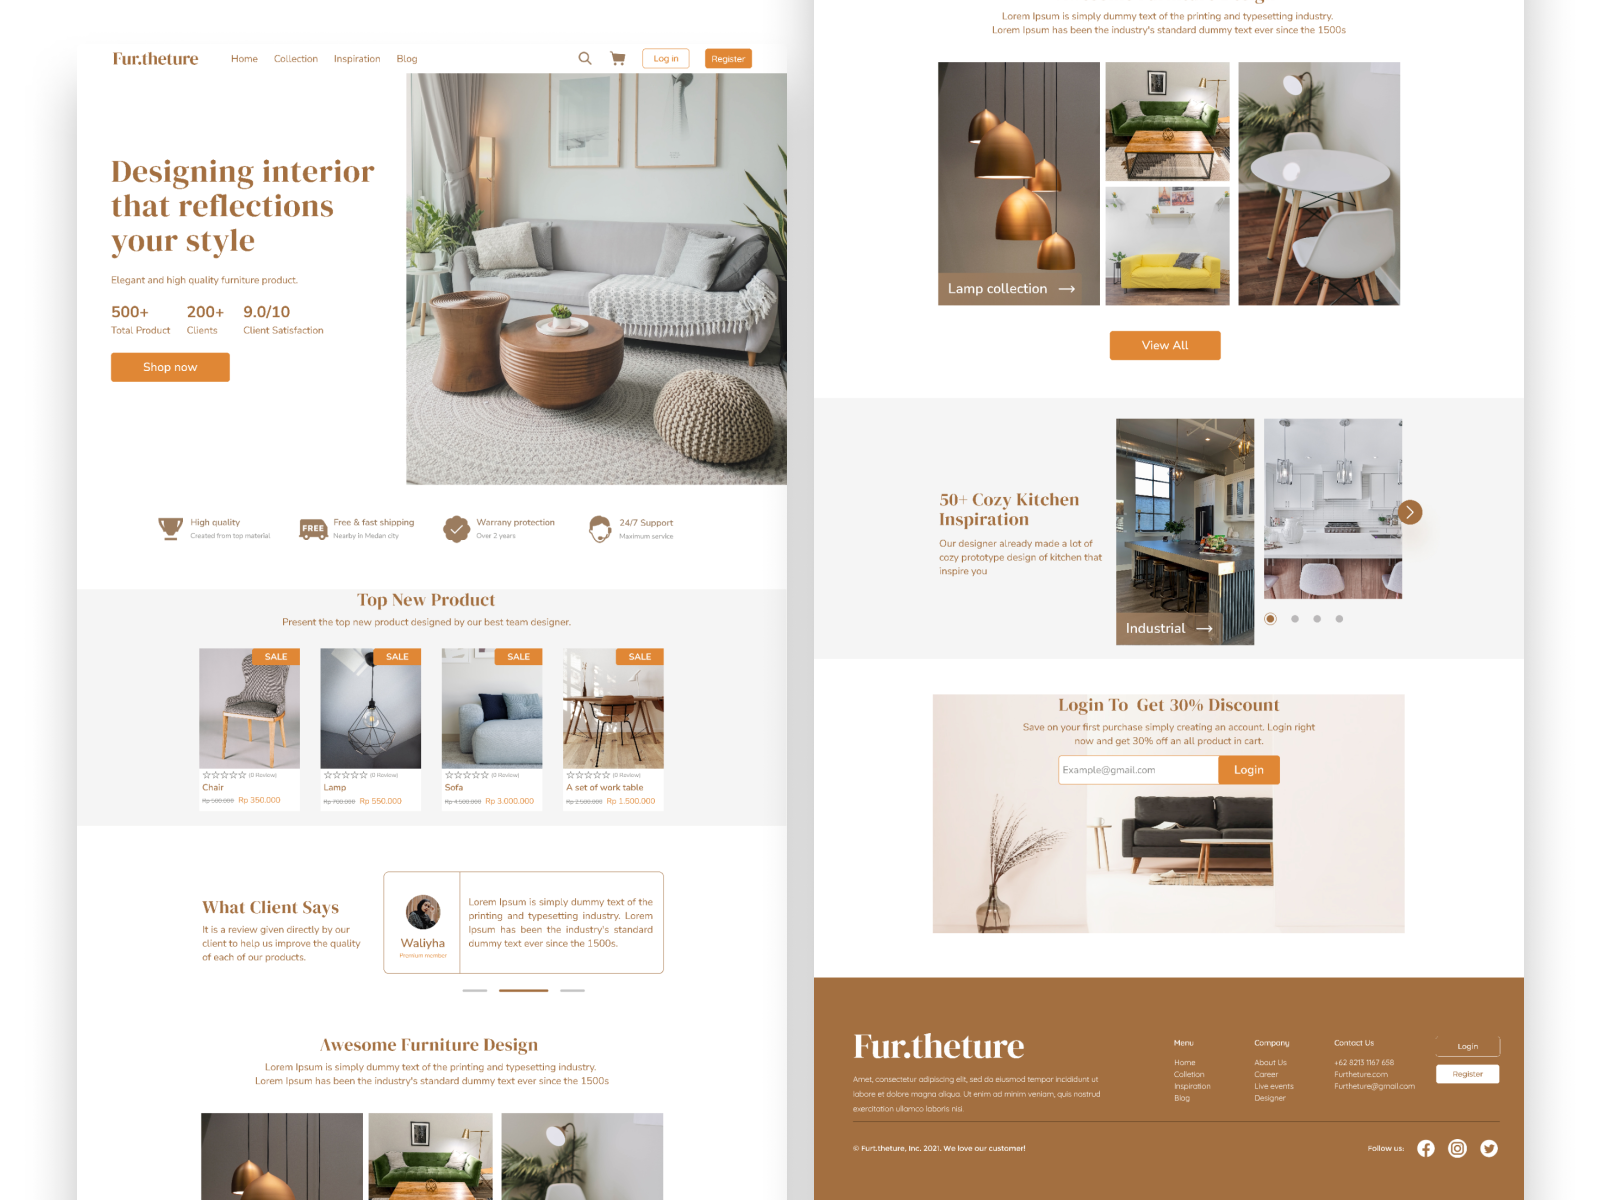 Daily UI :: 003 - Landing Page Design by Littleboardzhw on Dribbble